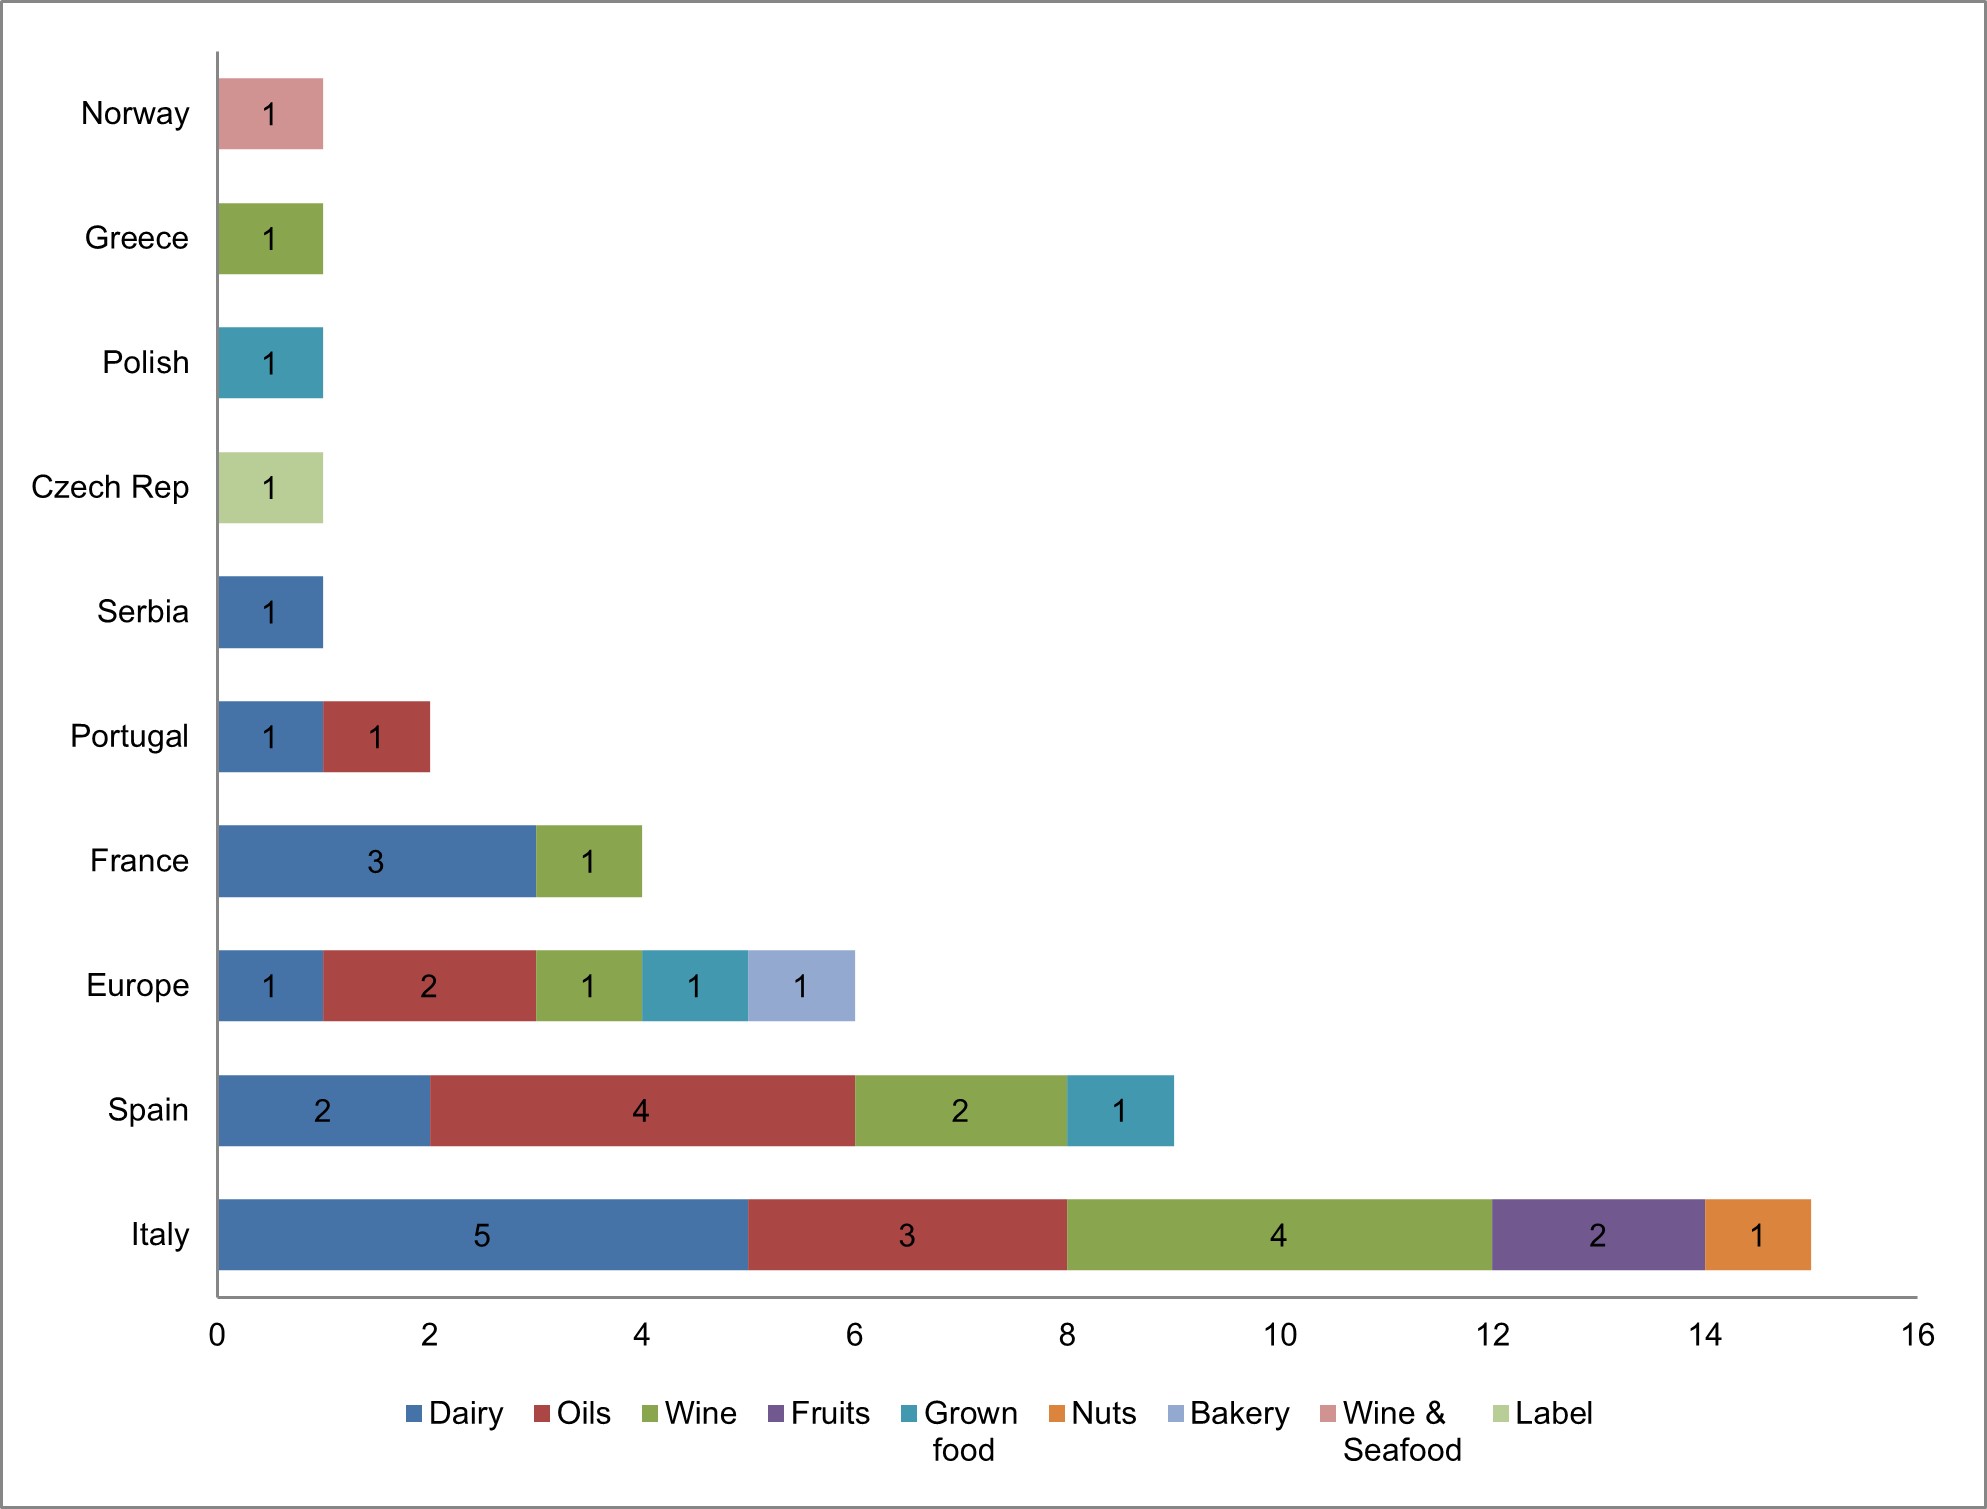 PDO’s research by country and food type product, based on selected sample.